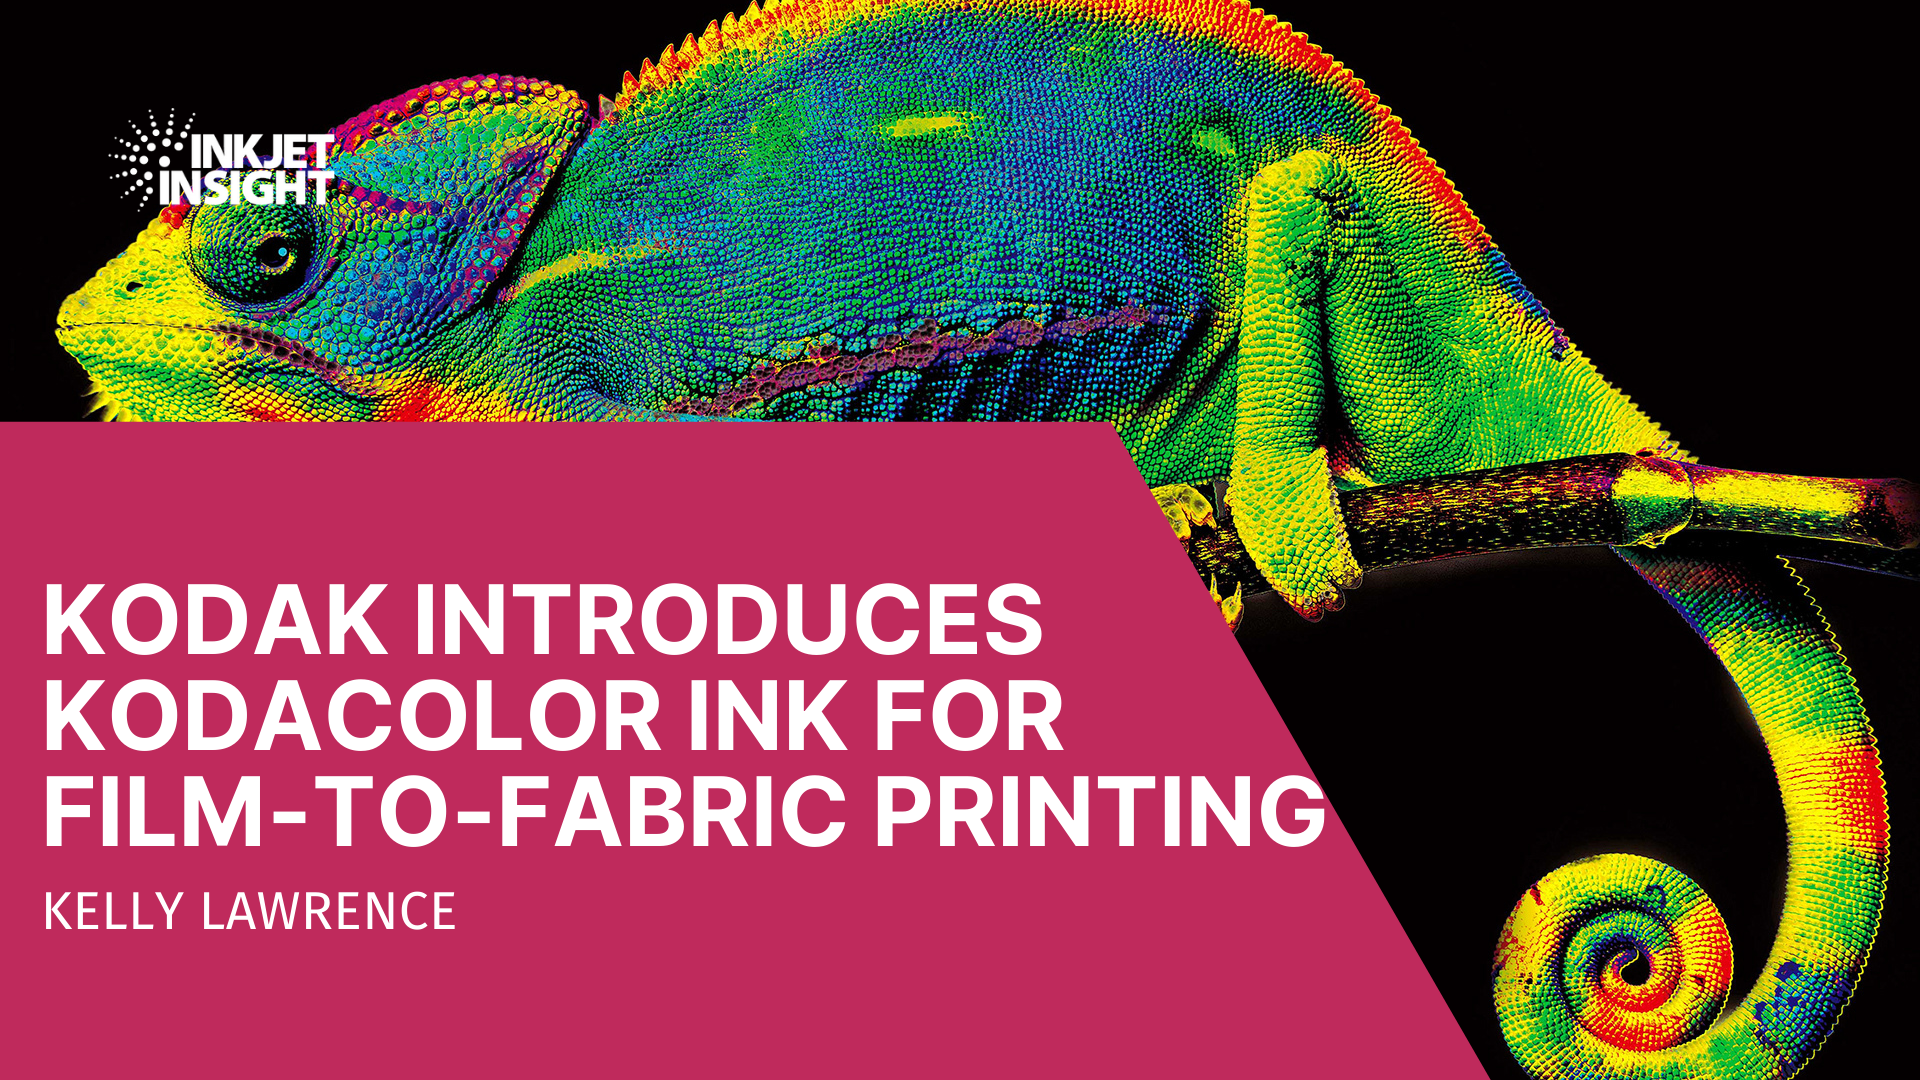 Featured image for “Kodak Introduces KODACOLOR Ink for Film-to-Fabric Printing”